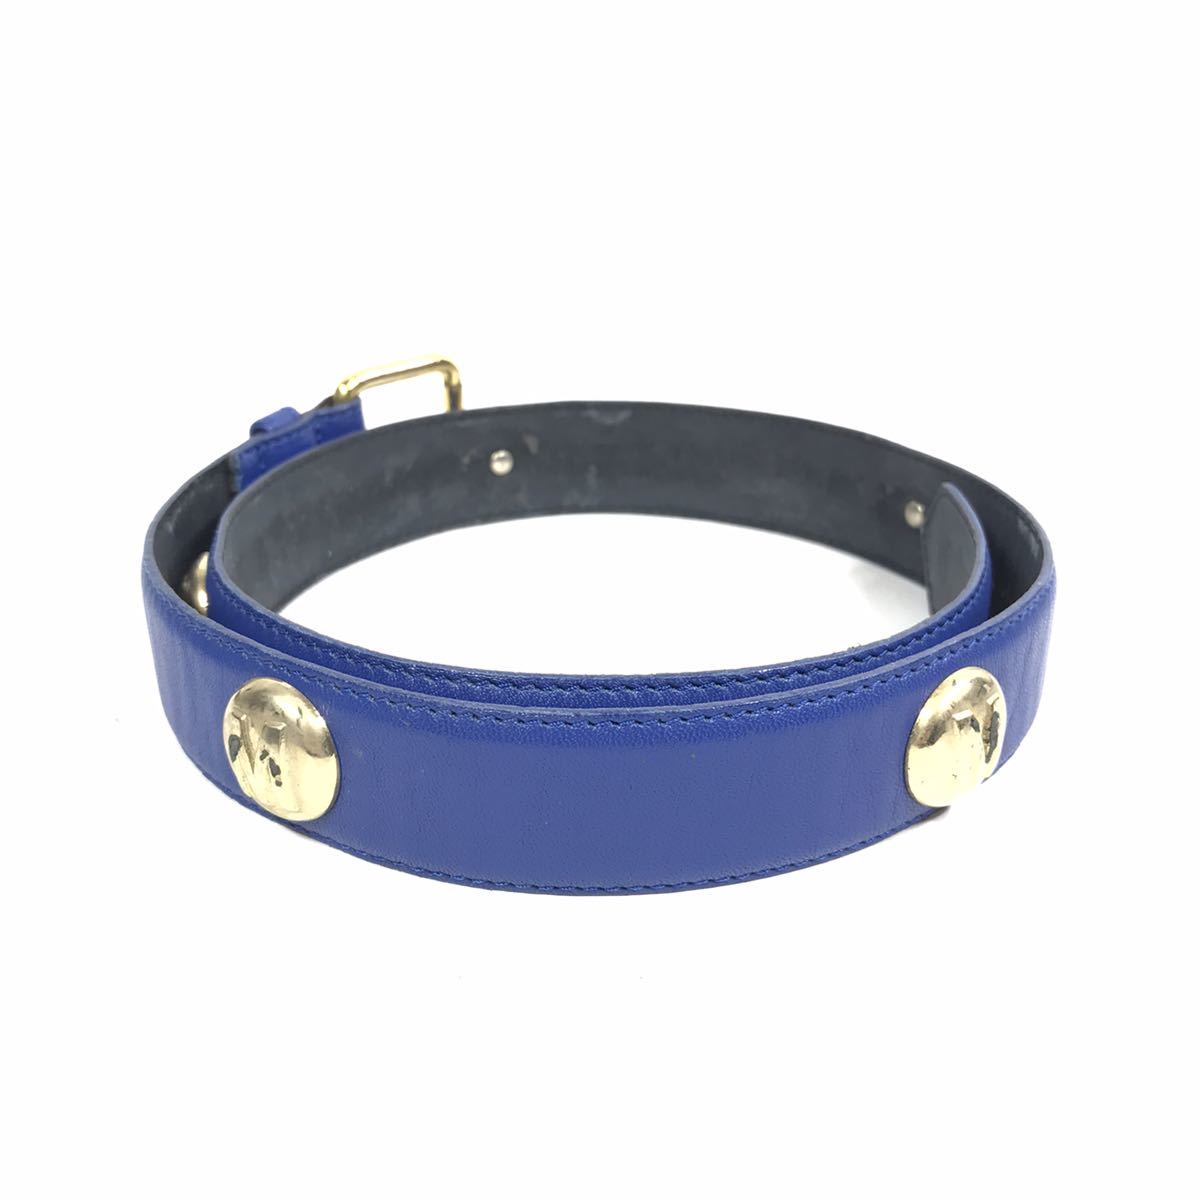 [ Moschino ] genuine article MOSCHINO belt total length 82cm width 3cm blue color series M metal fittings for women lady's postage 520 jpy 